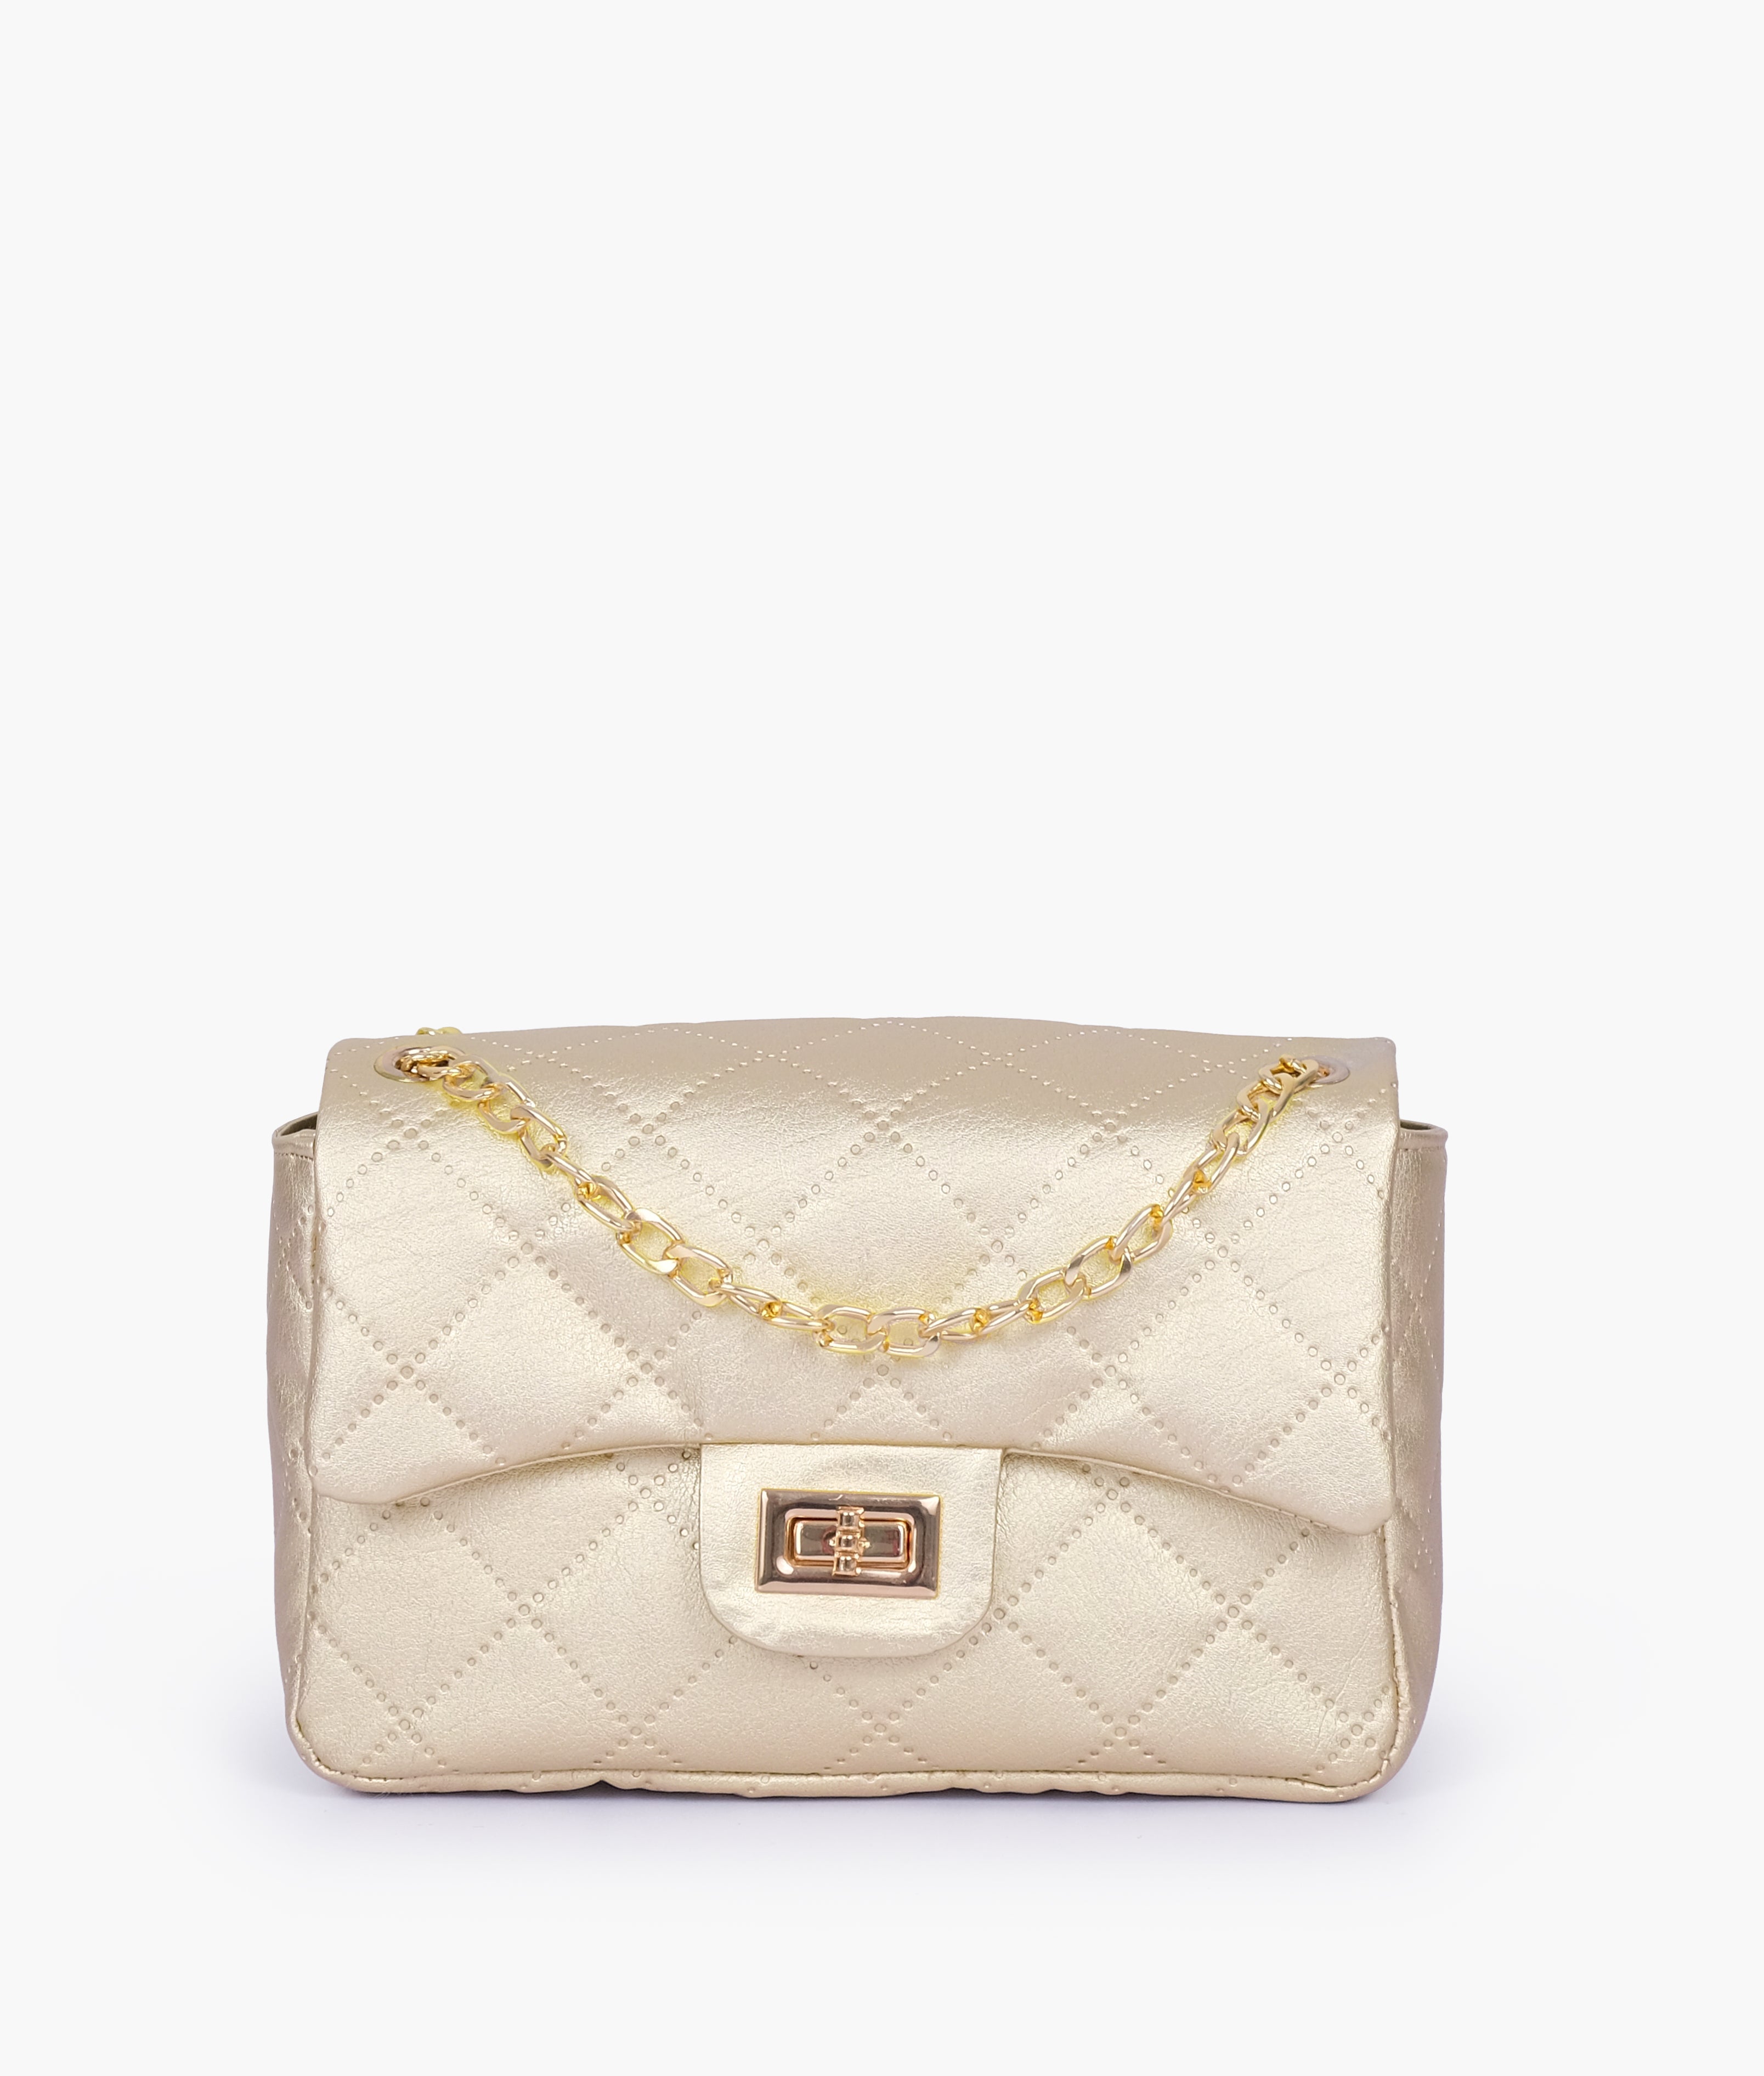 Golden quilted mini bag with chain